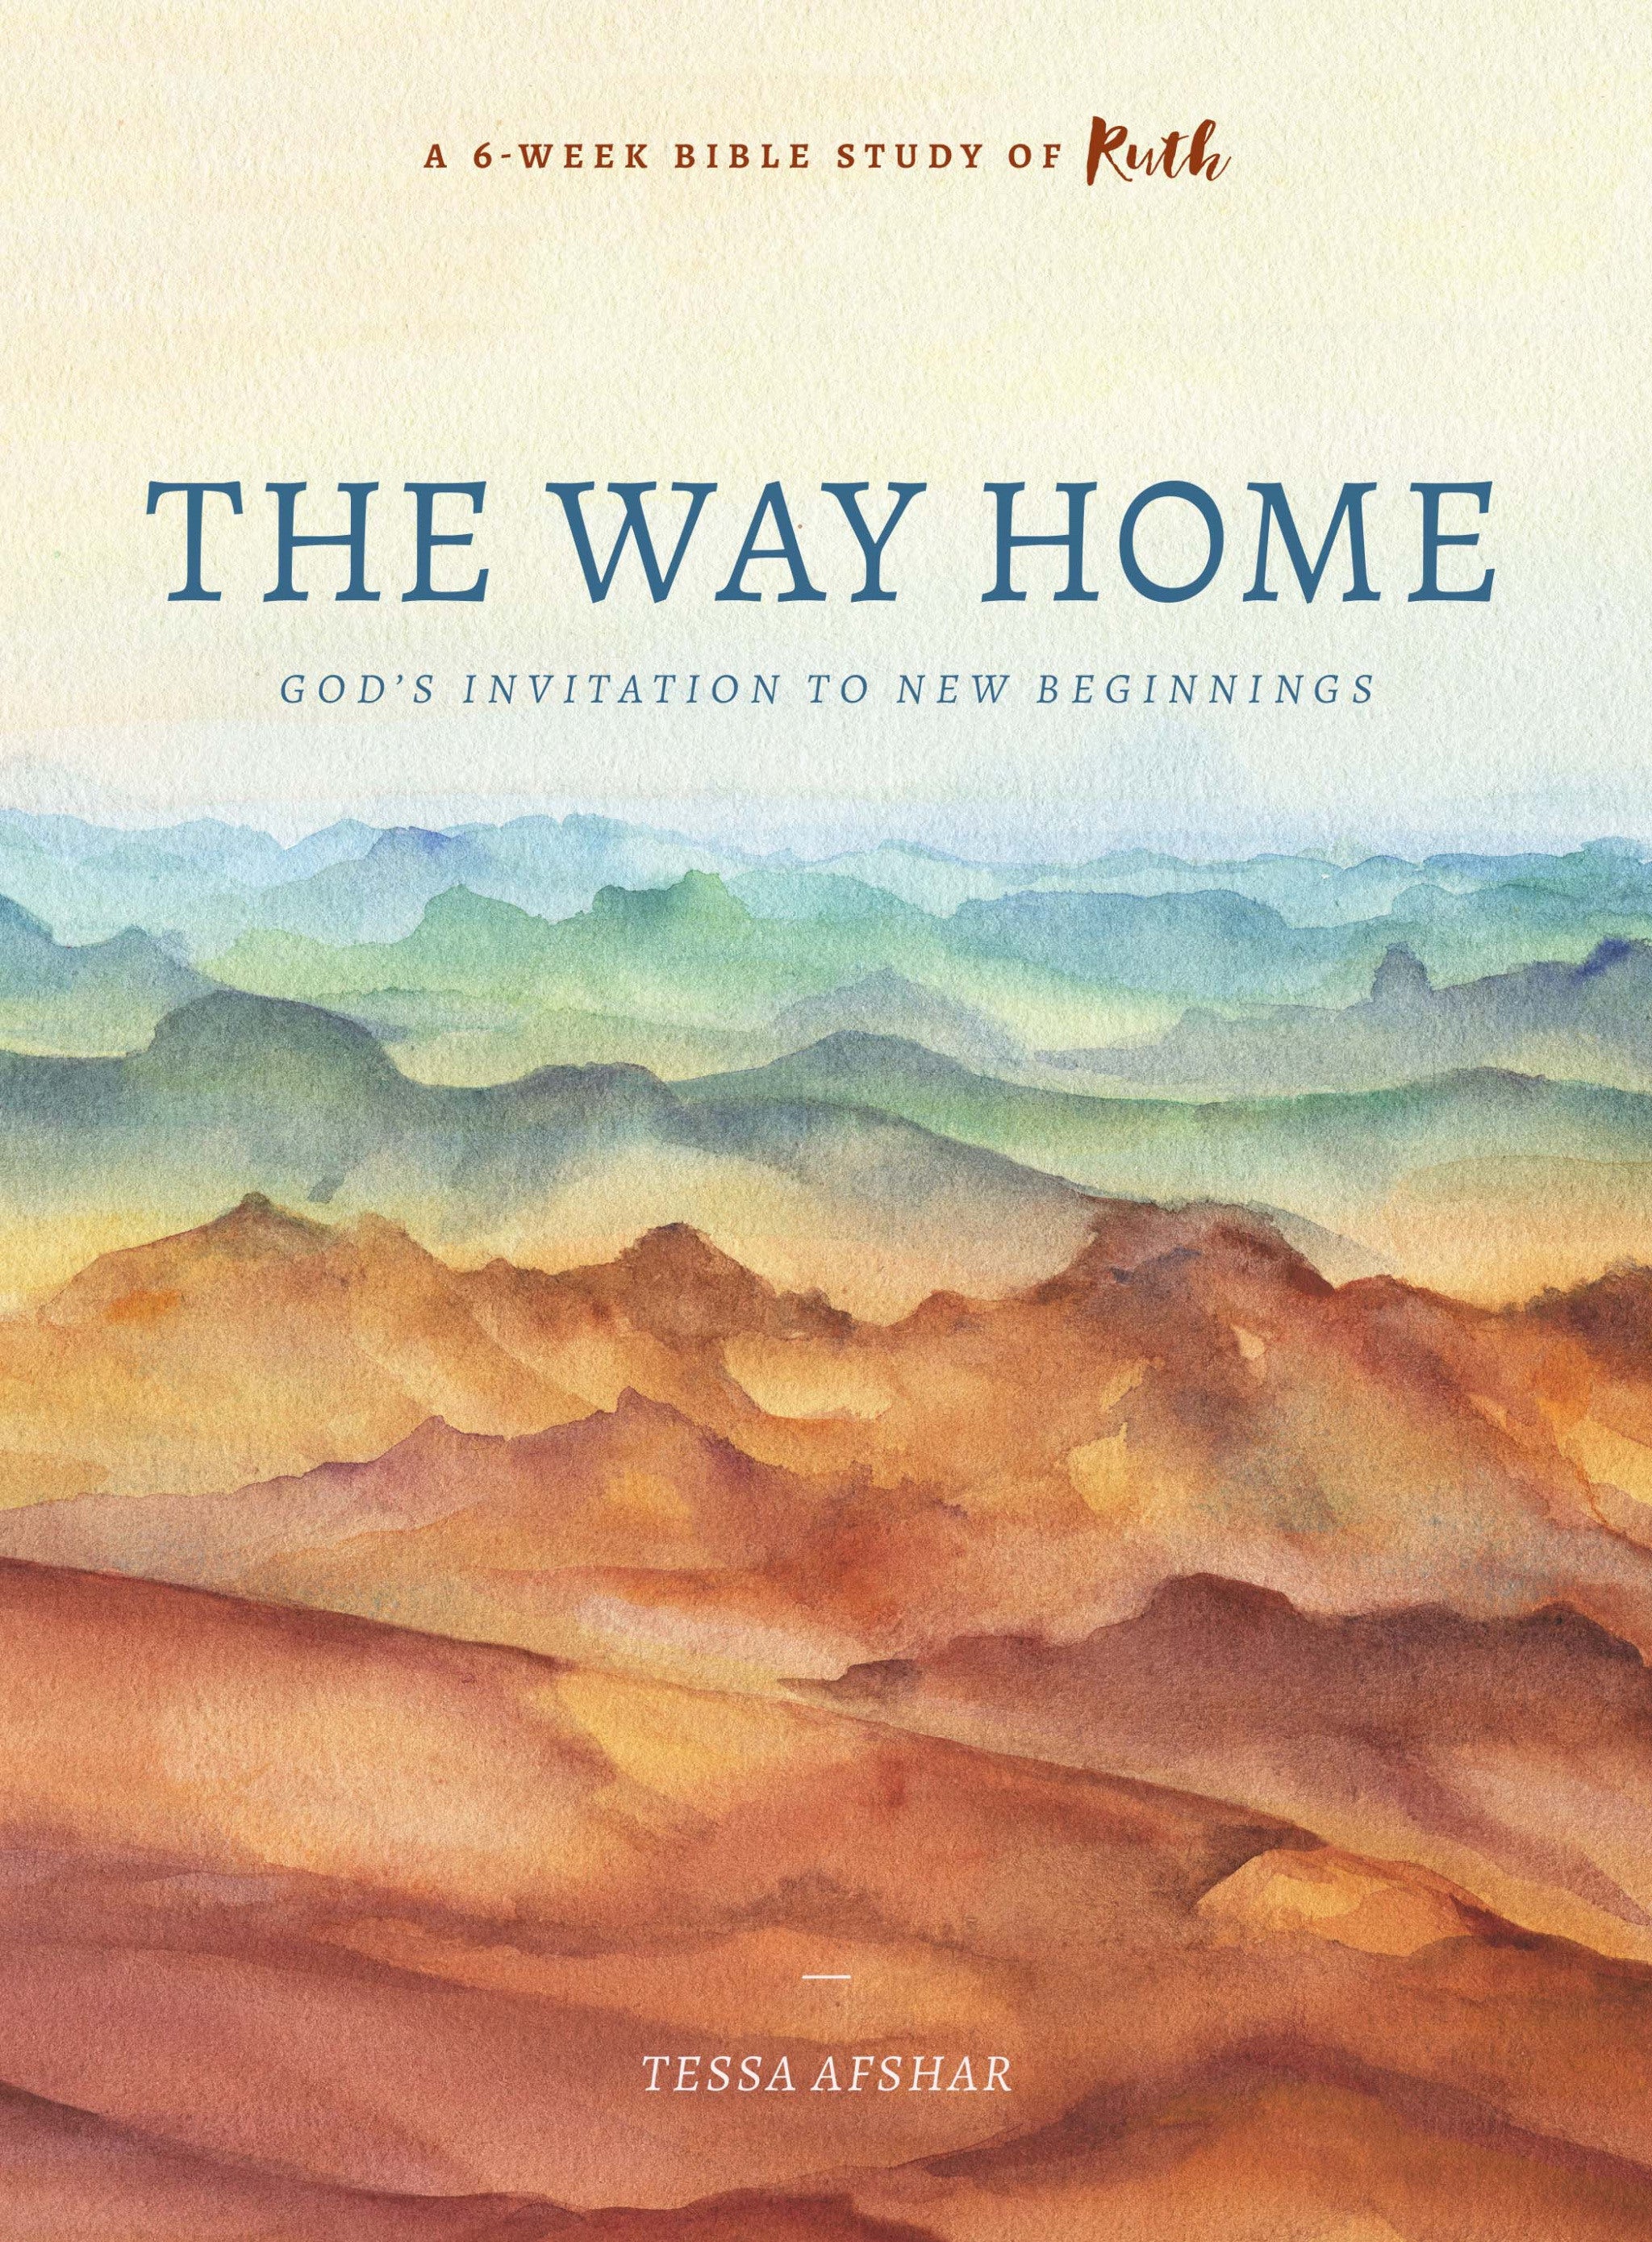 Image of Way Home other